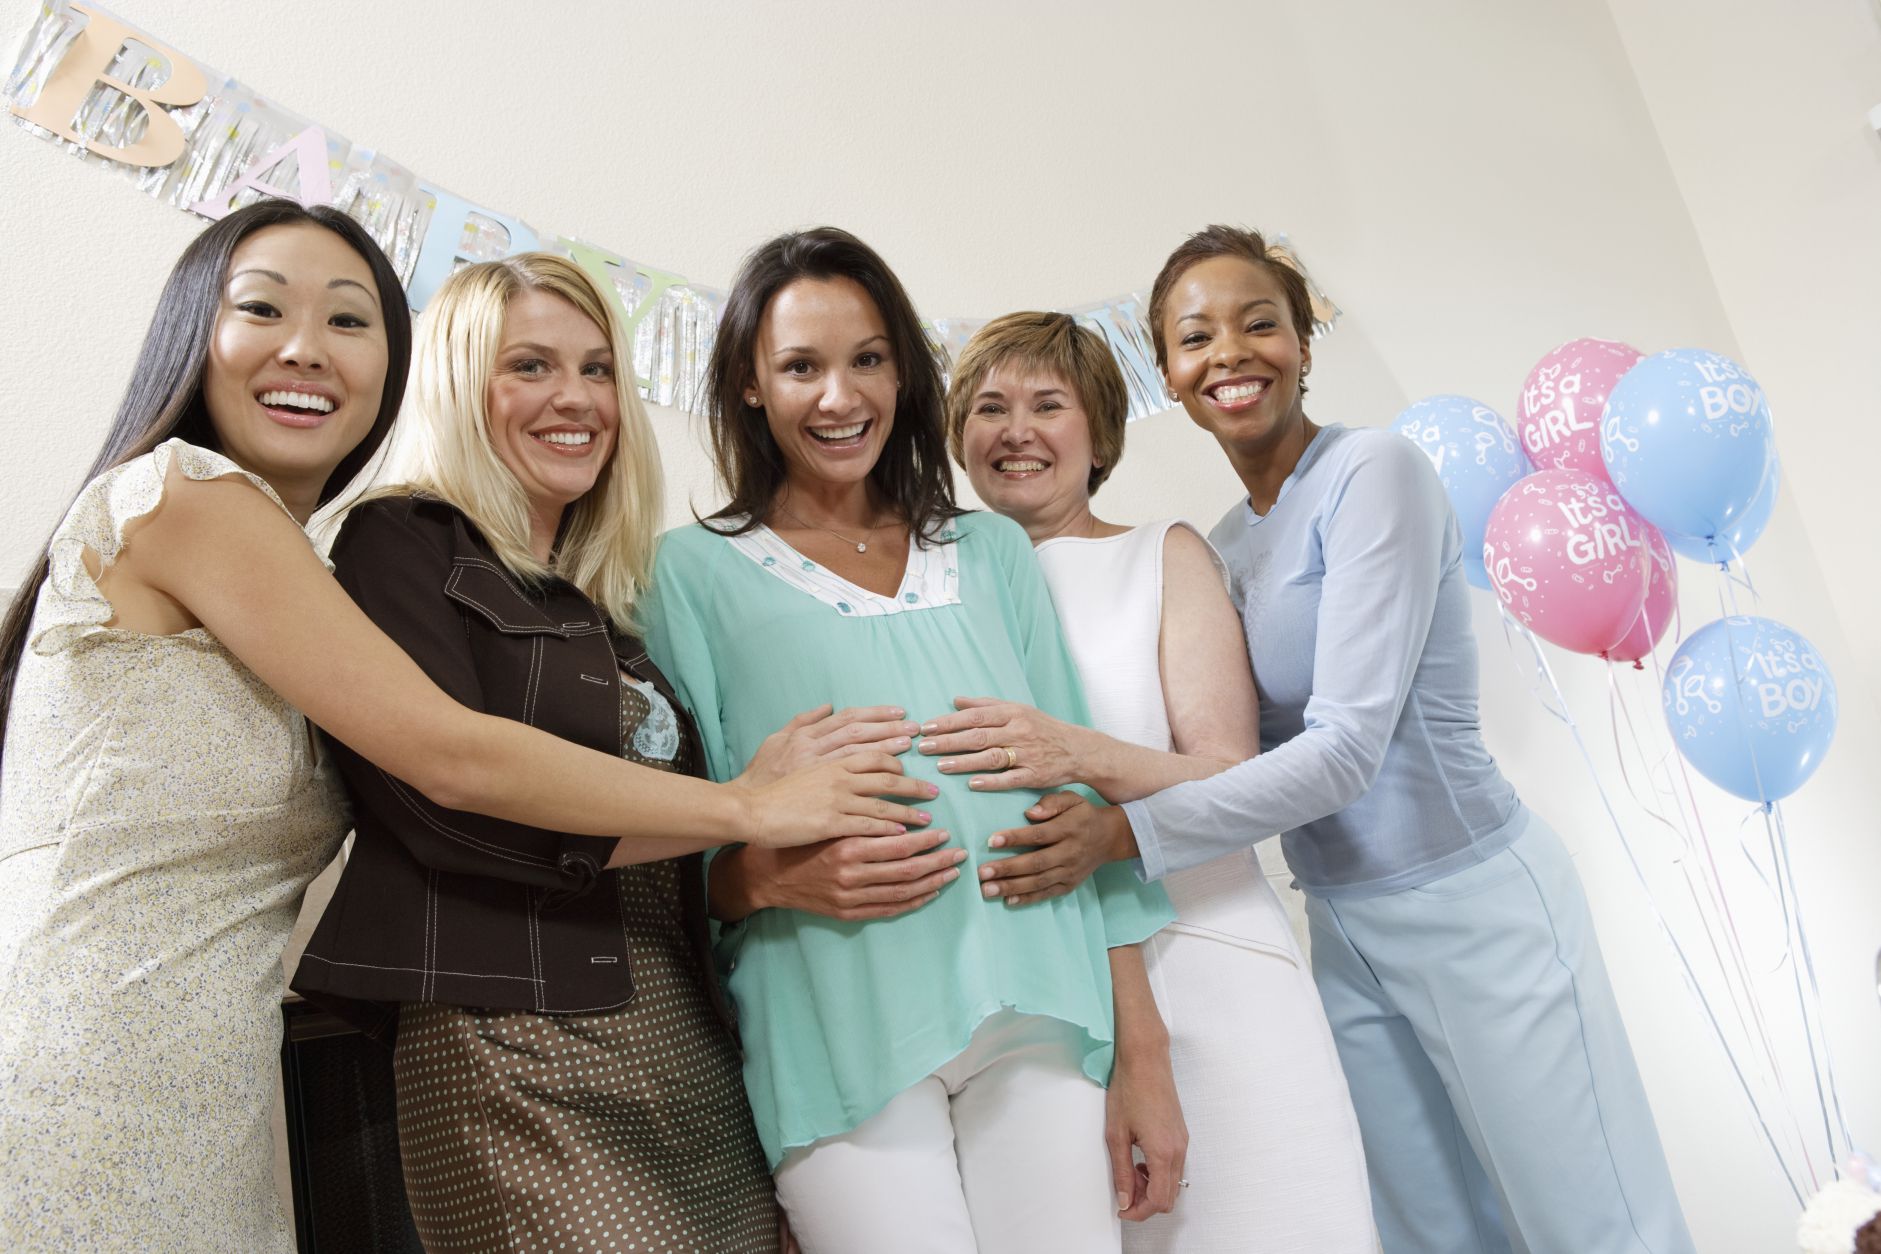 A pregnant woman surrounded by friends at her baby shower.